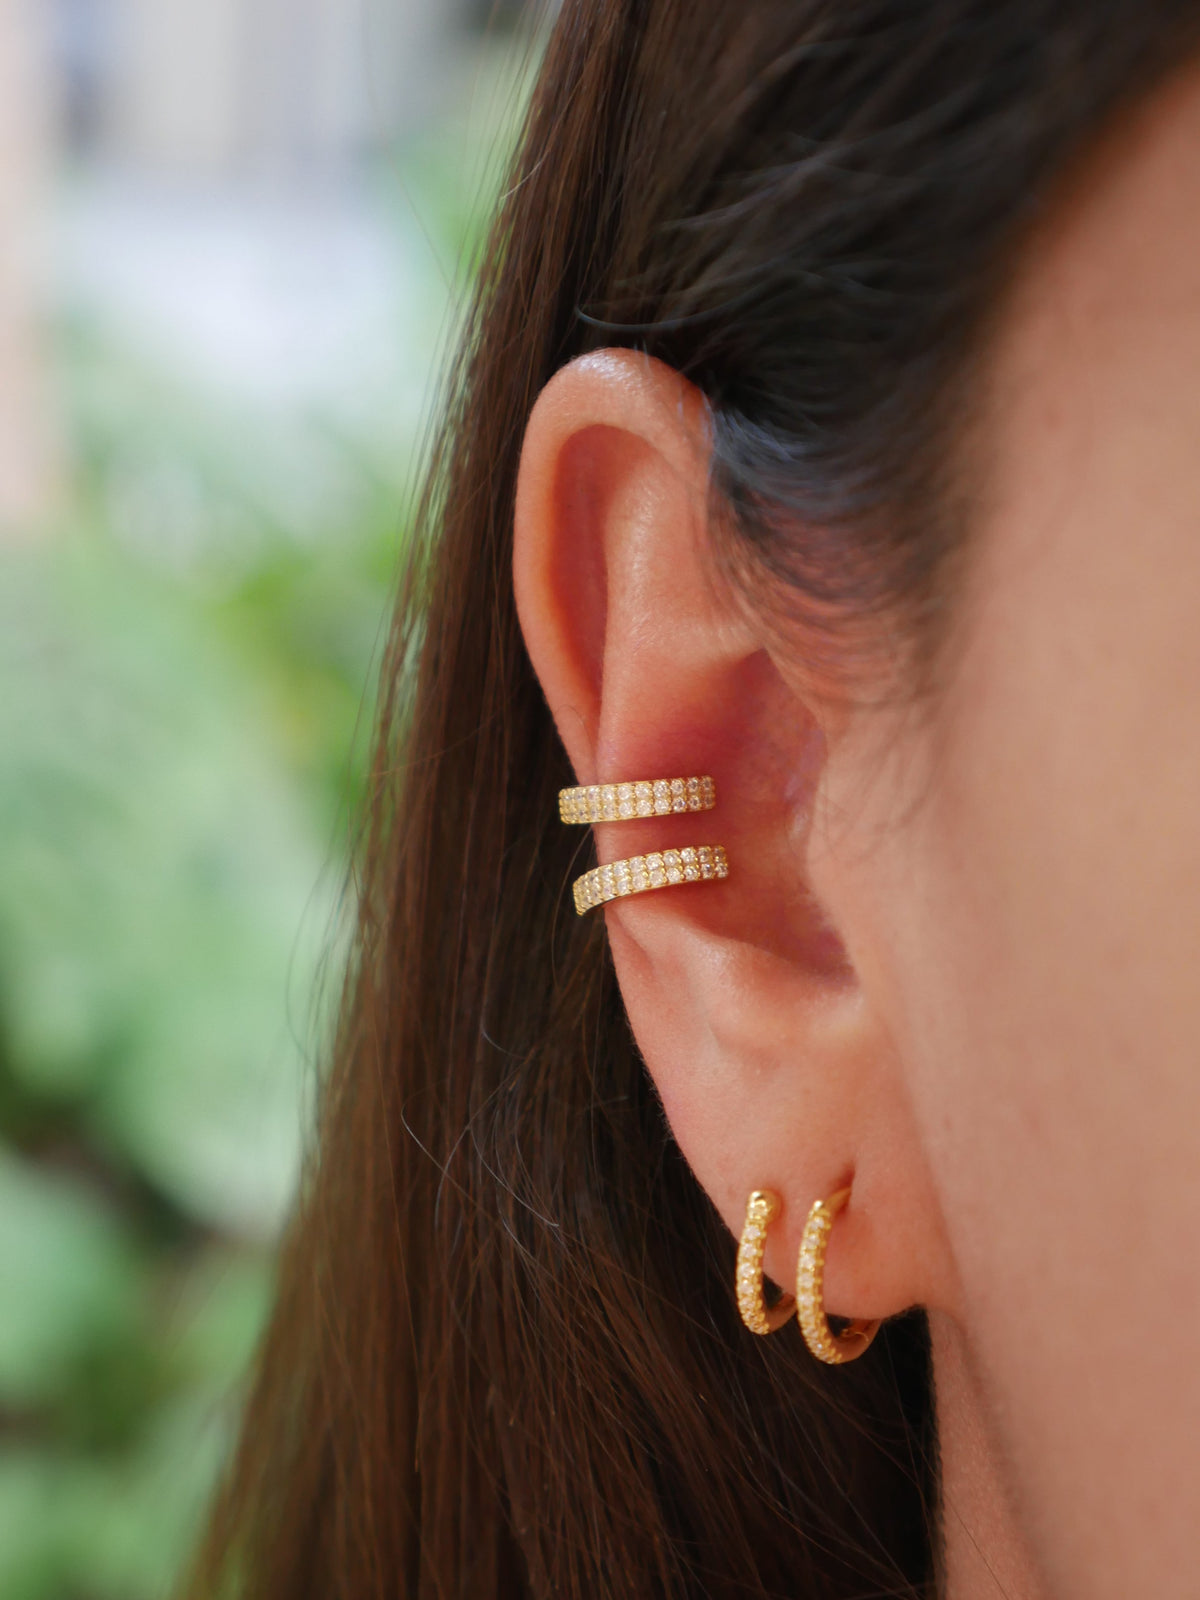 conch ear cuffs for men and woman with diamond cz gold plated sterling silver waterproof popular unique earrings gift ideas things to do in Miami trending and popular instagram shops famous jewelry stores good quality jewelry designer inspired Kesley Boutique